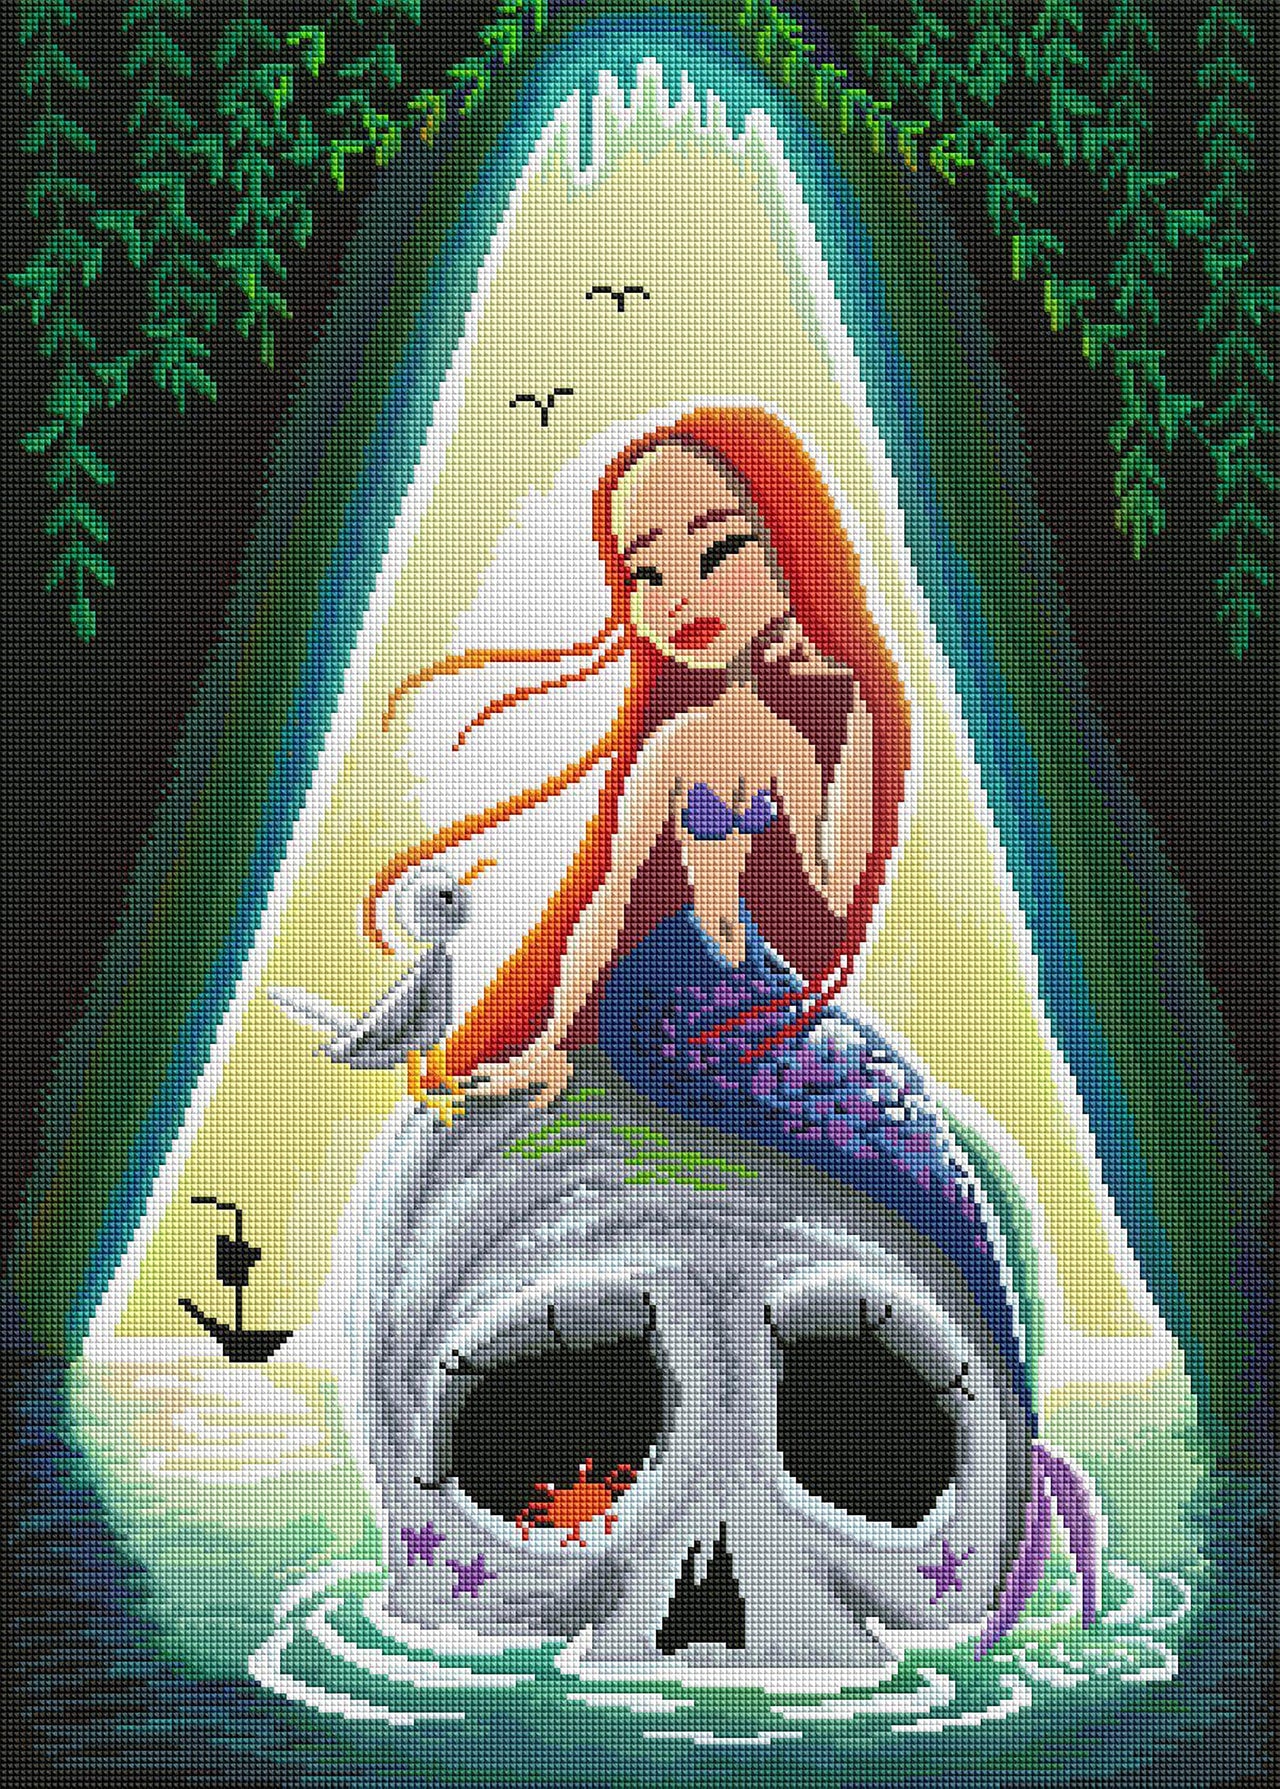 Diamond Painting Skull Mermaid 20" x 28″ (51cm x 71cm) / Square with 42 Colors including 4 ABs / 56,481